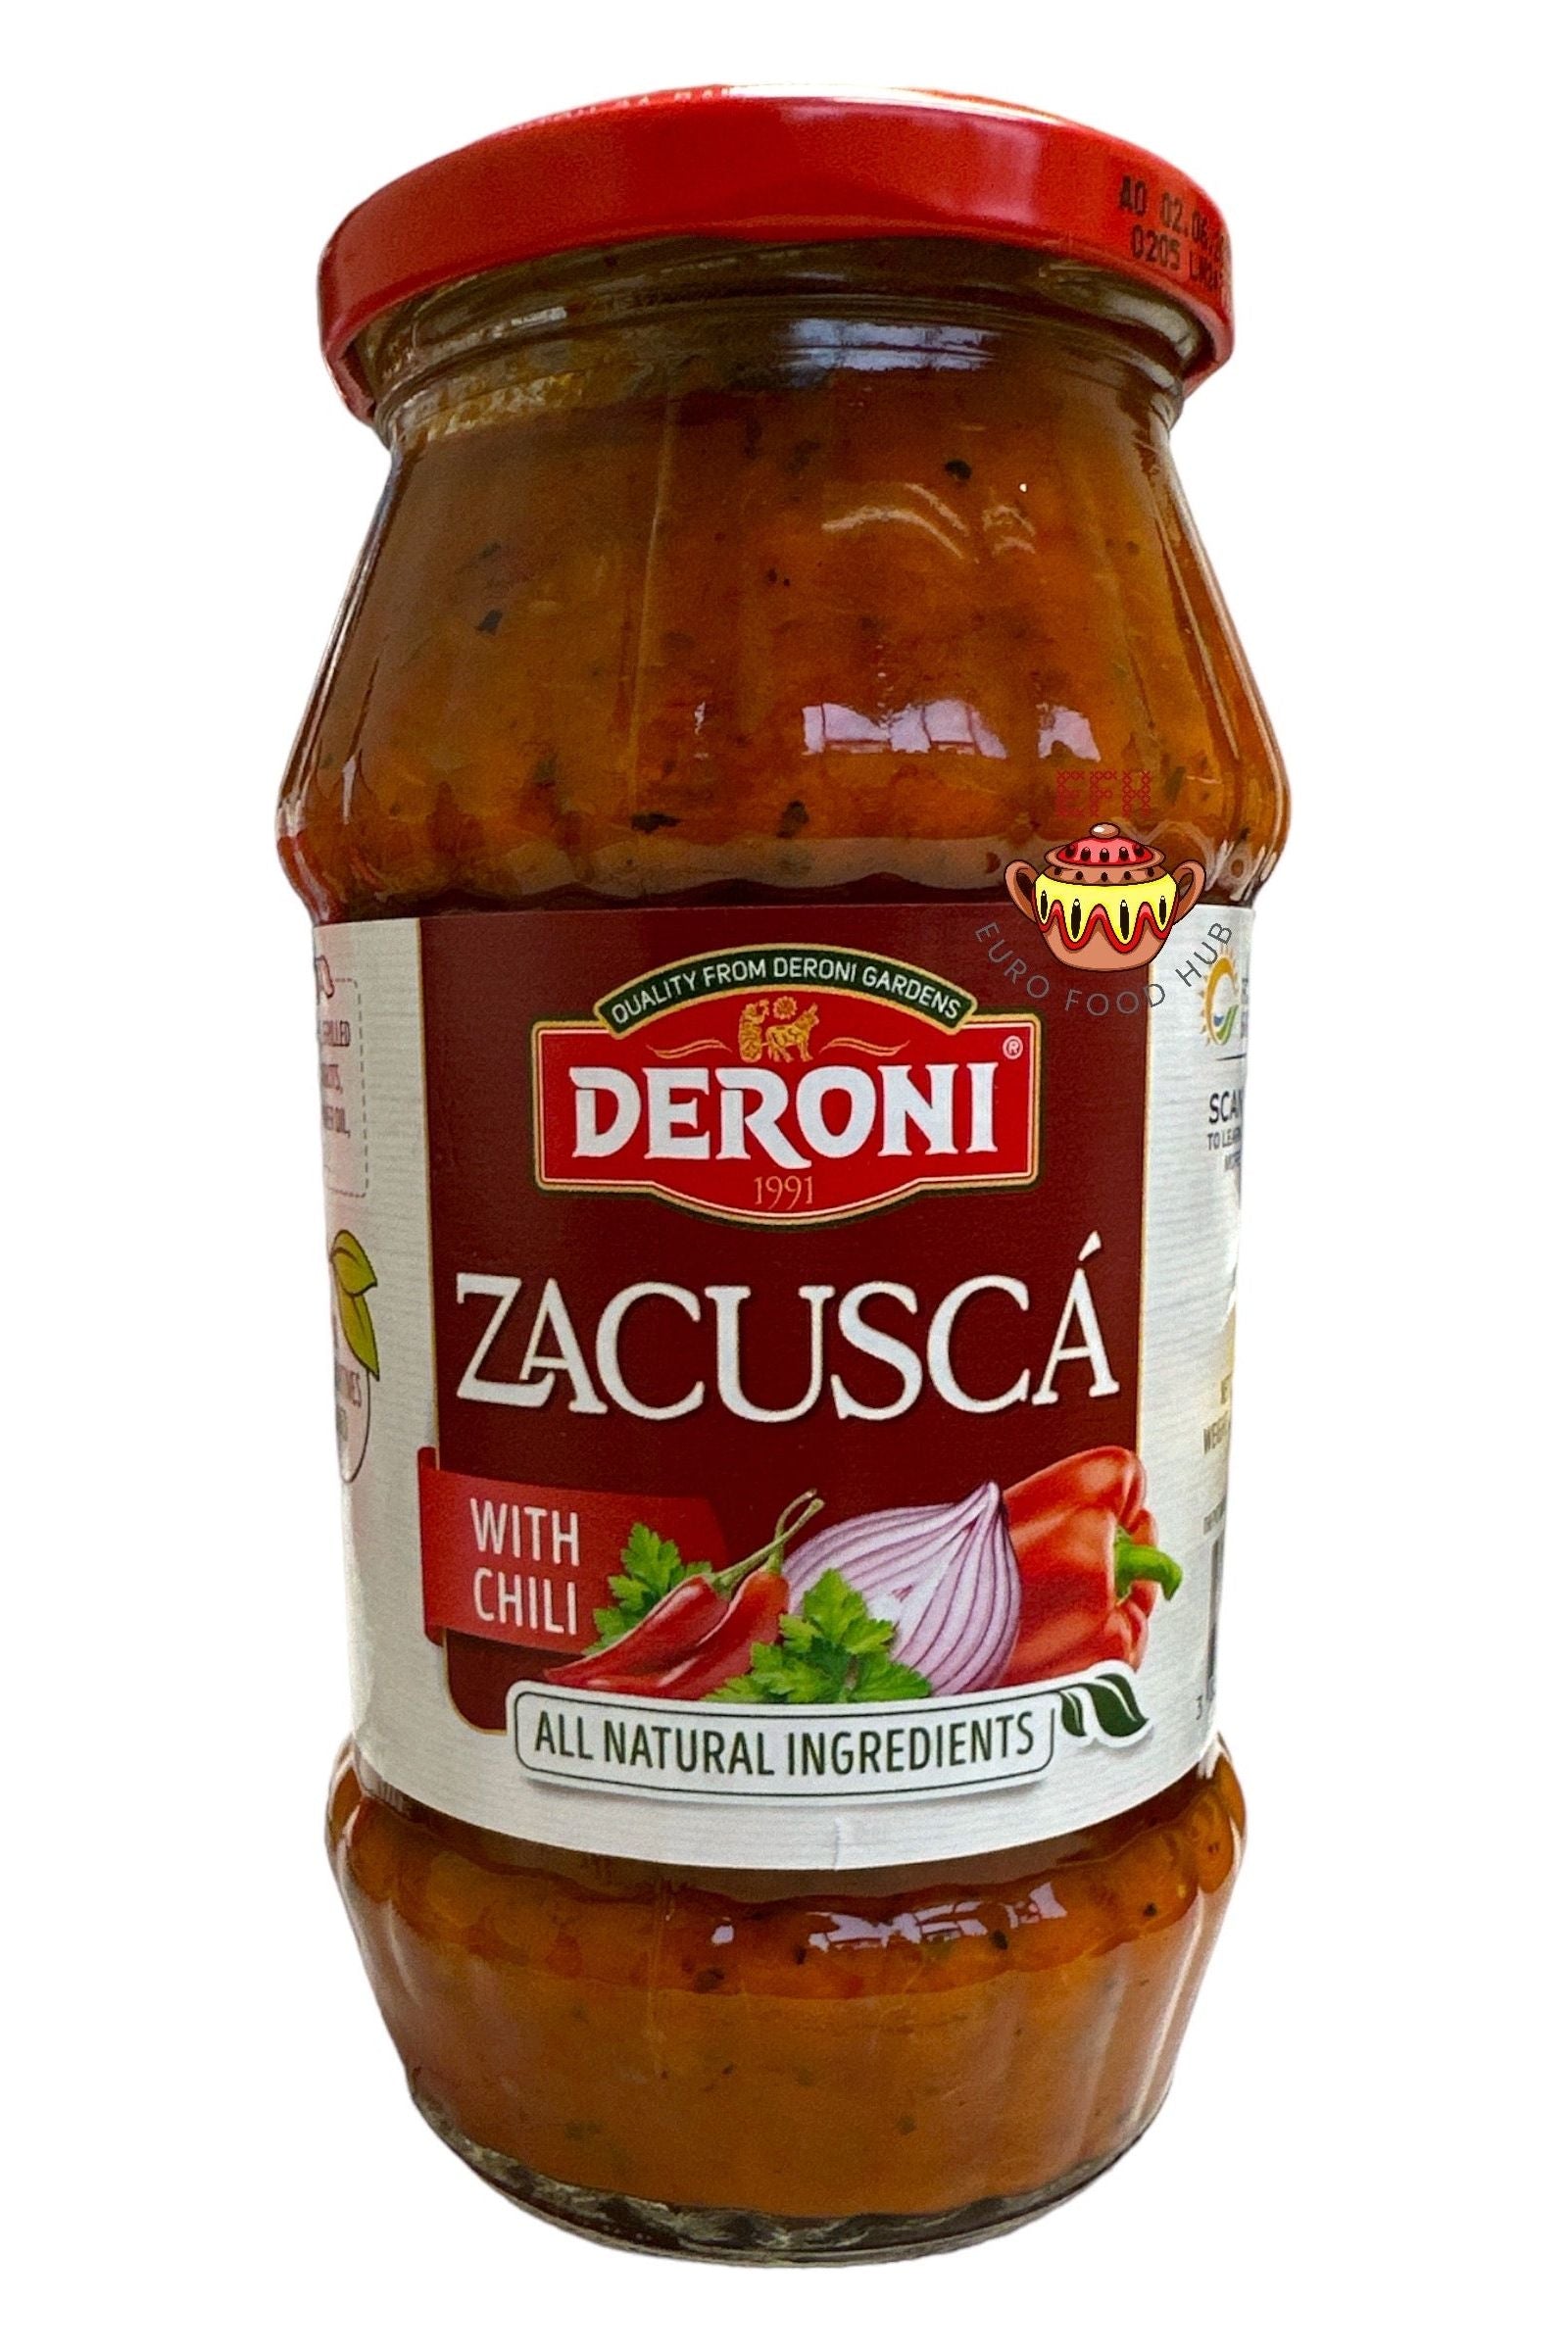 NEW! SPICY Deroni Homemade Zacusca with Roasted Peppers with Chili- 500g